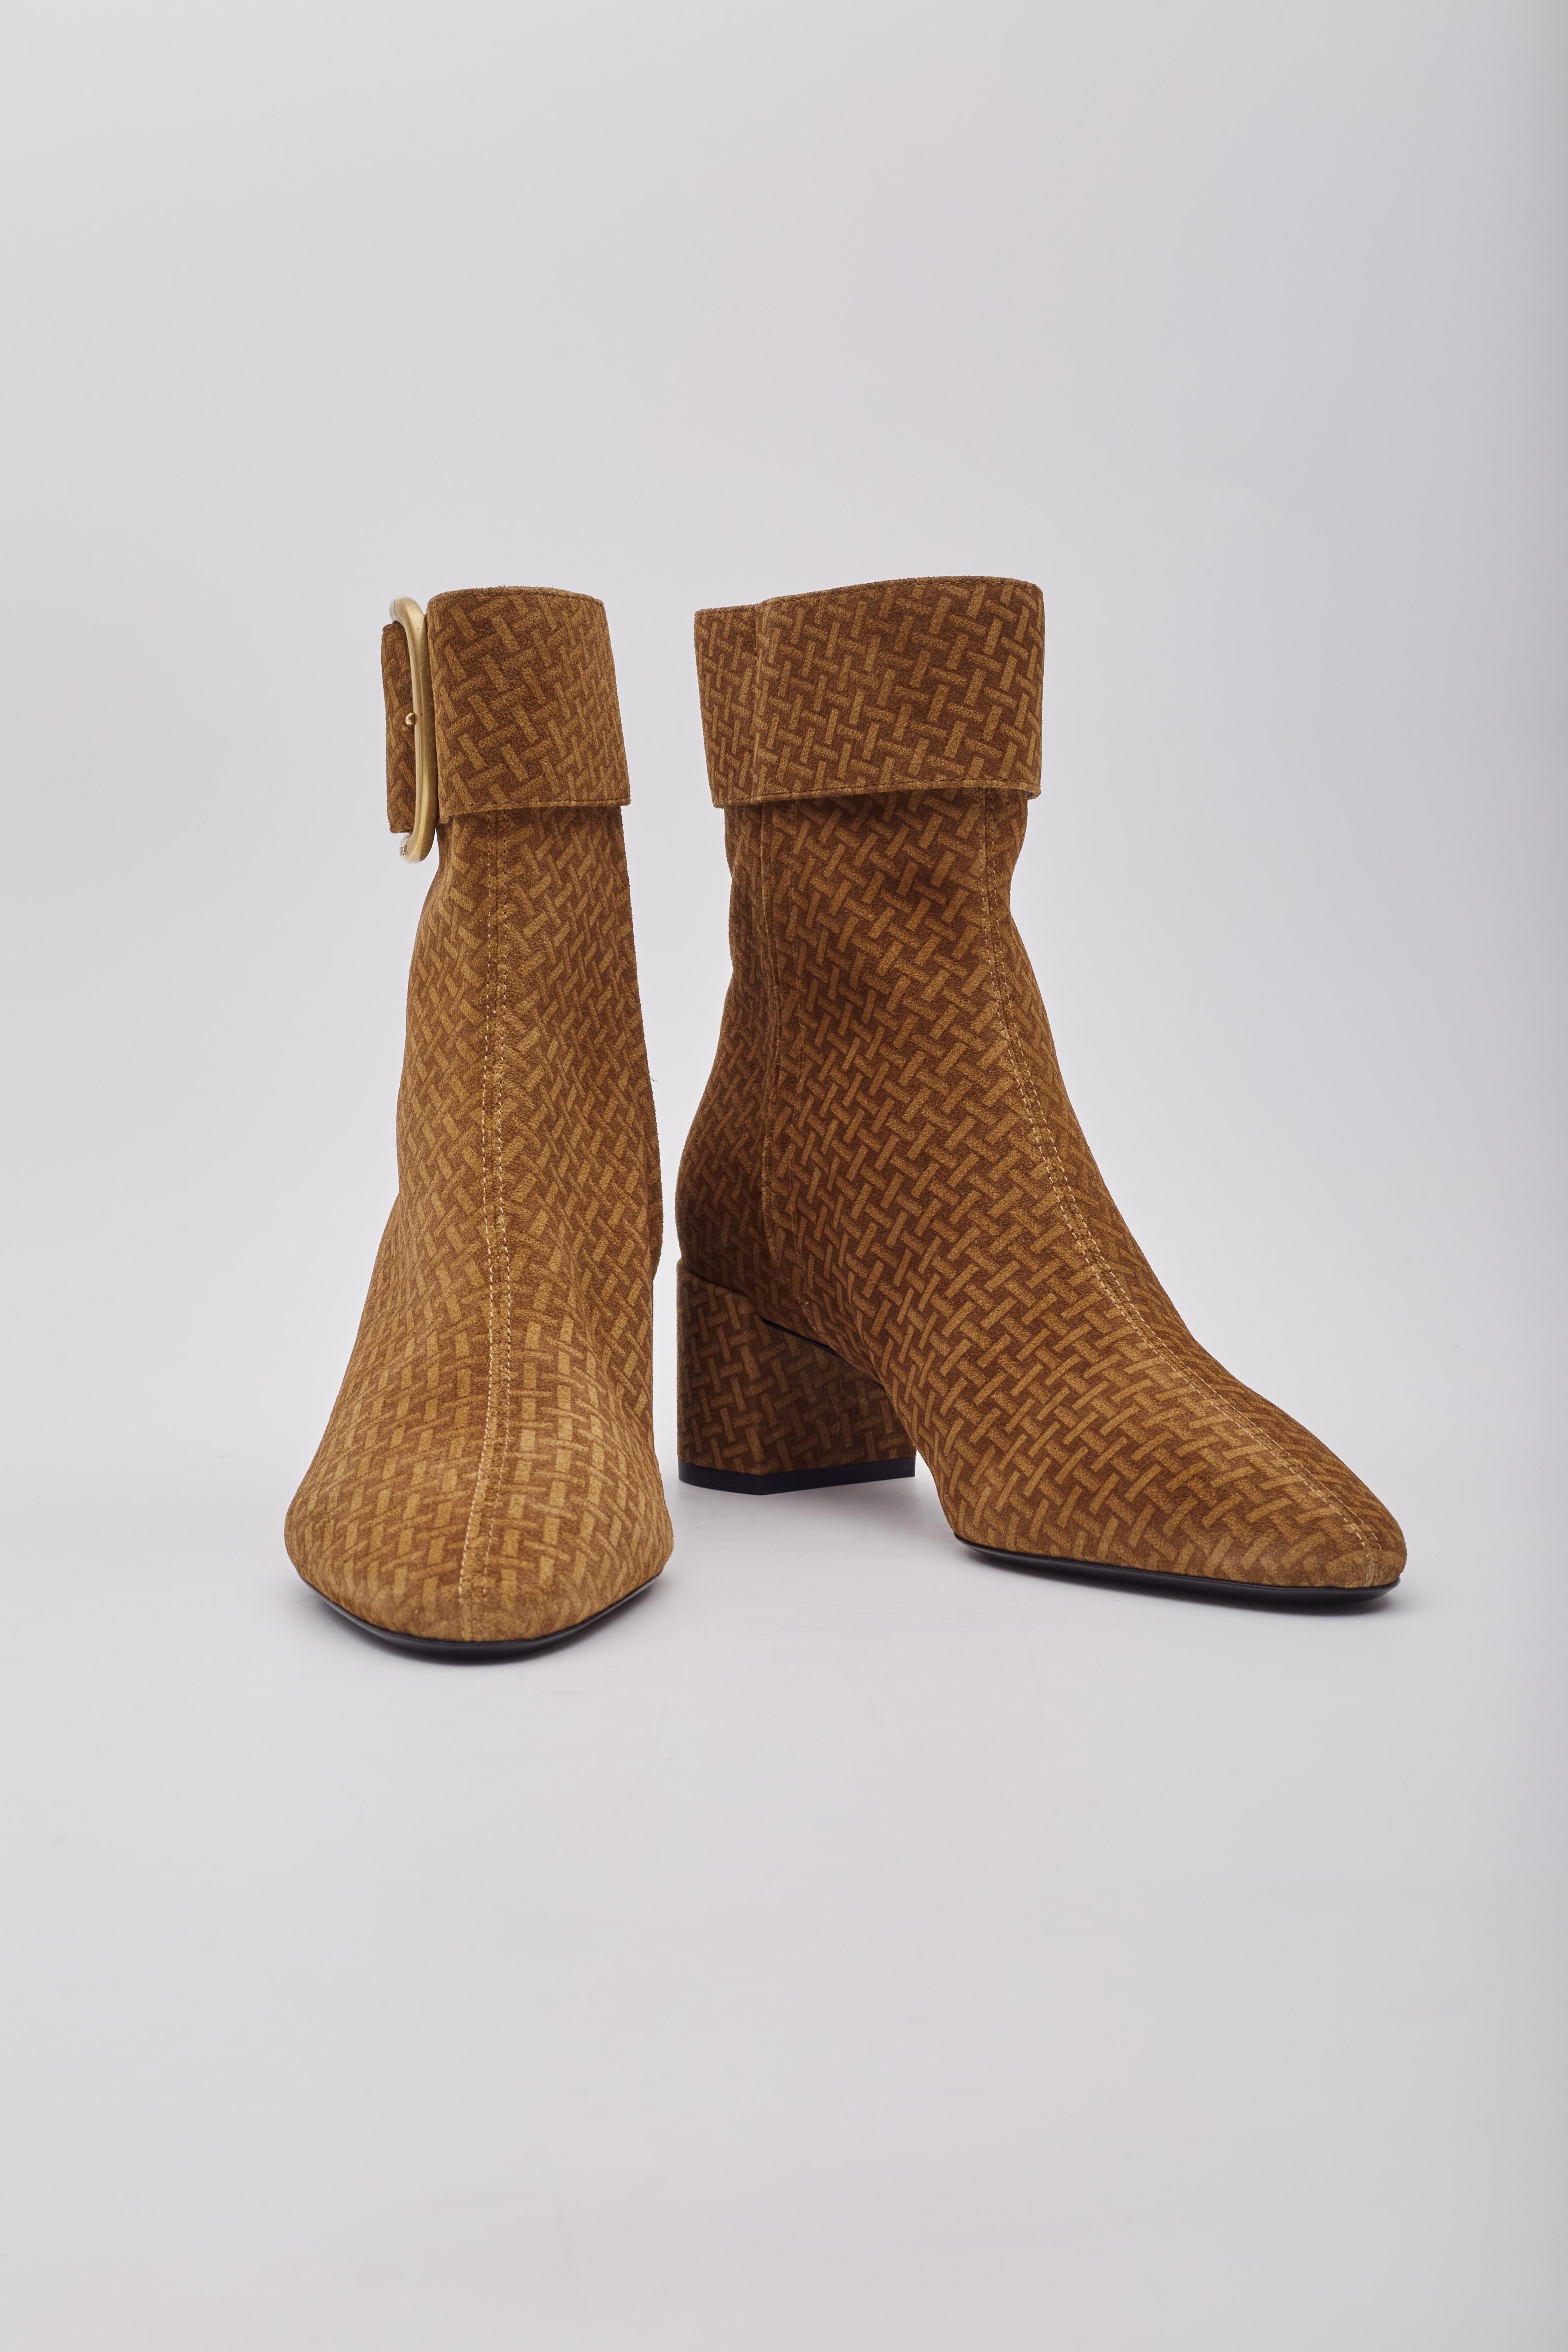 The Saint Laurent booties feature suede leather, a braided pattern printed around the shoe, an almond toe, a buckle and zip with engraving on the buckle and a 50mm heel.

Color: Brown with braided print throughout
Material: Suede leather
Style No.